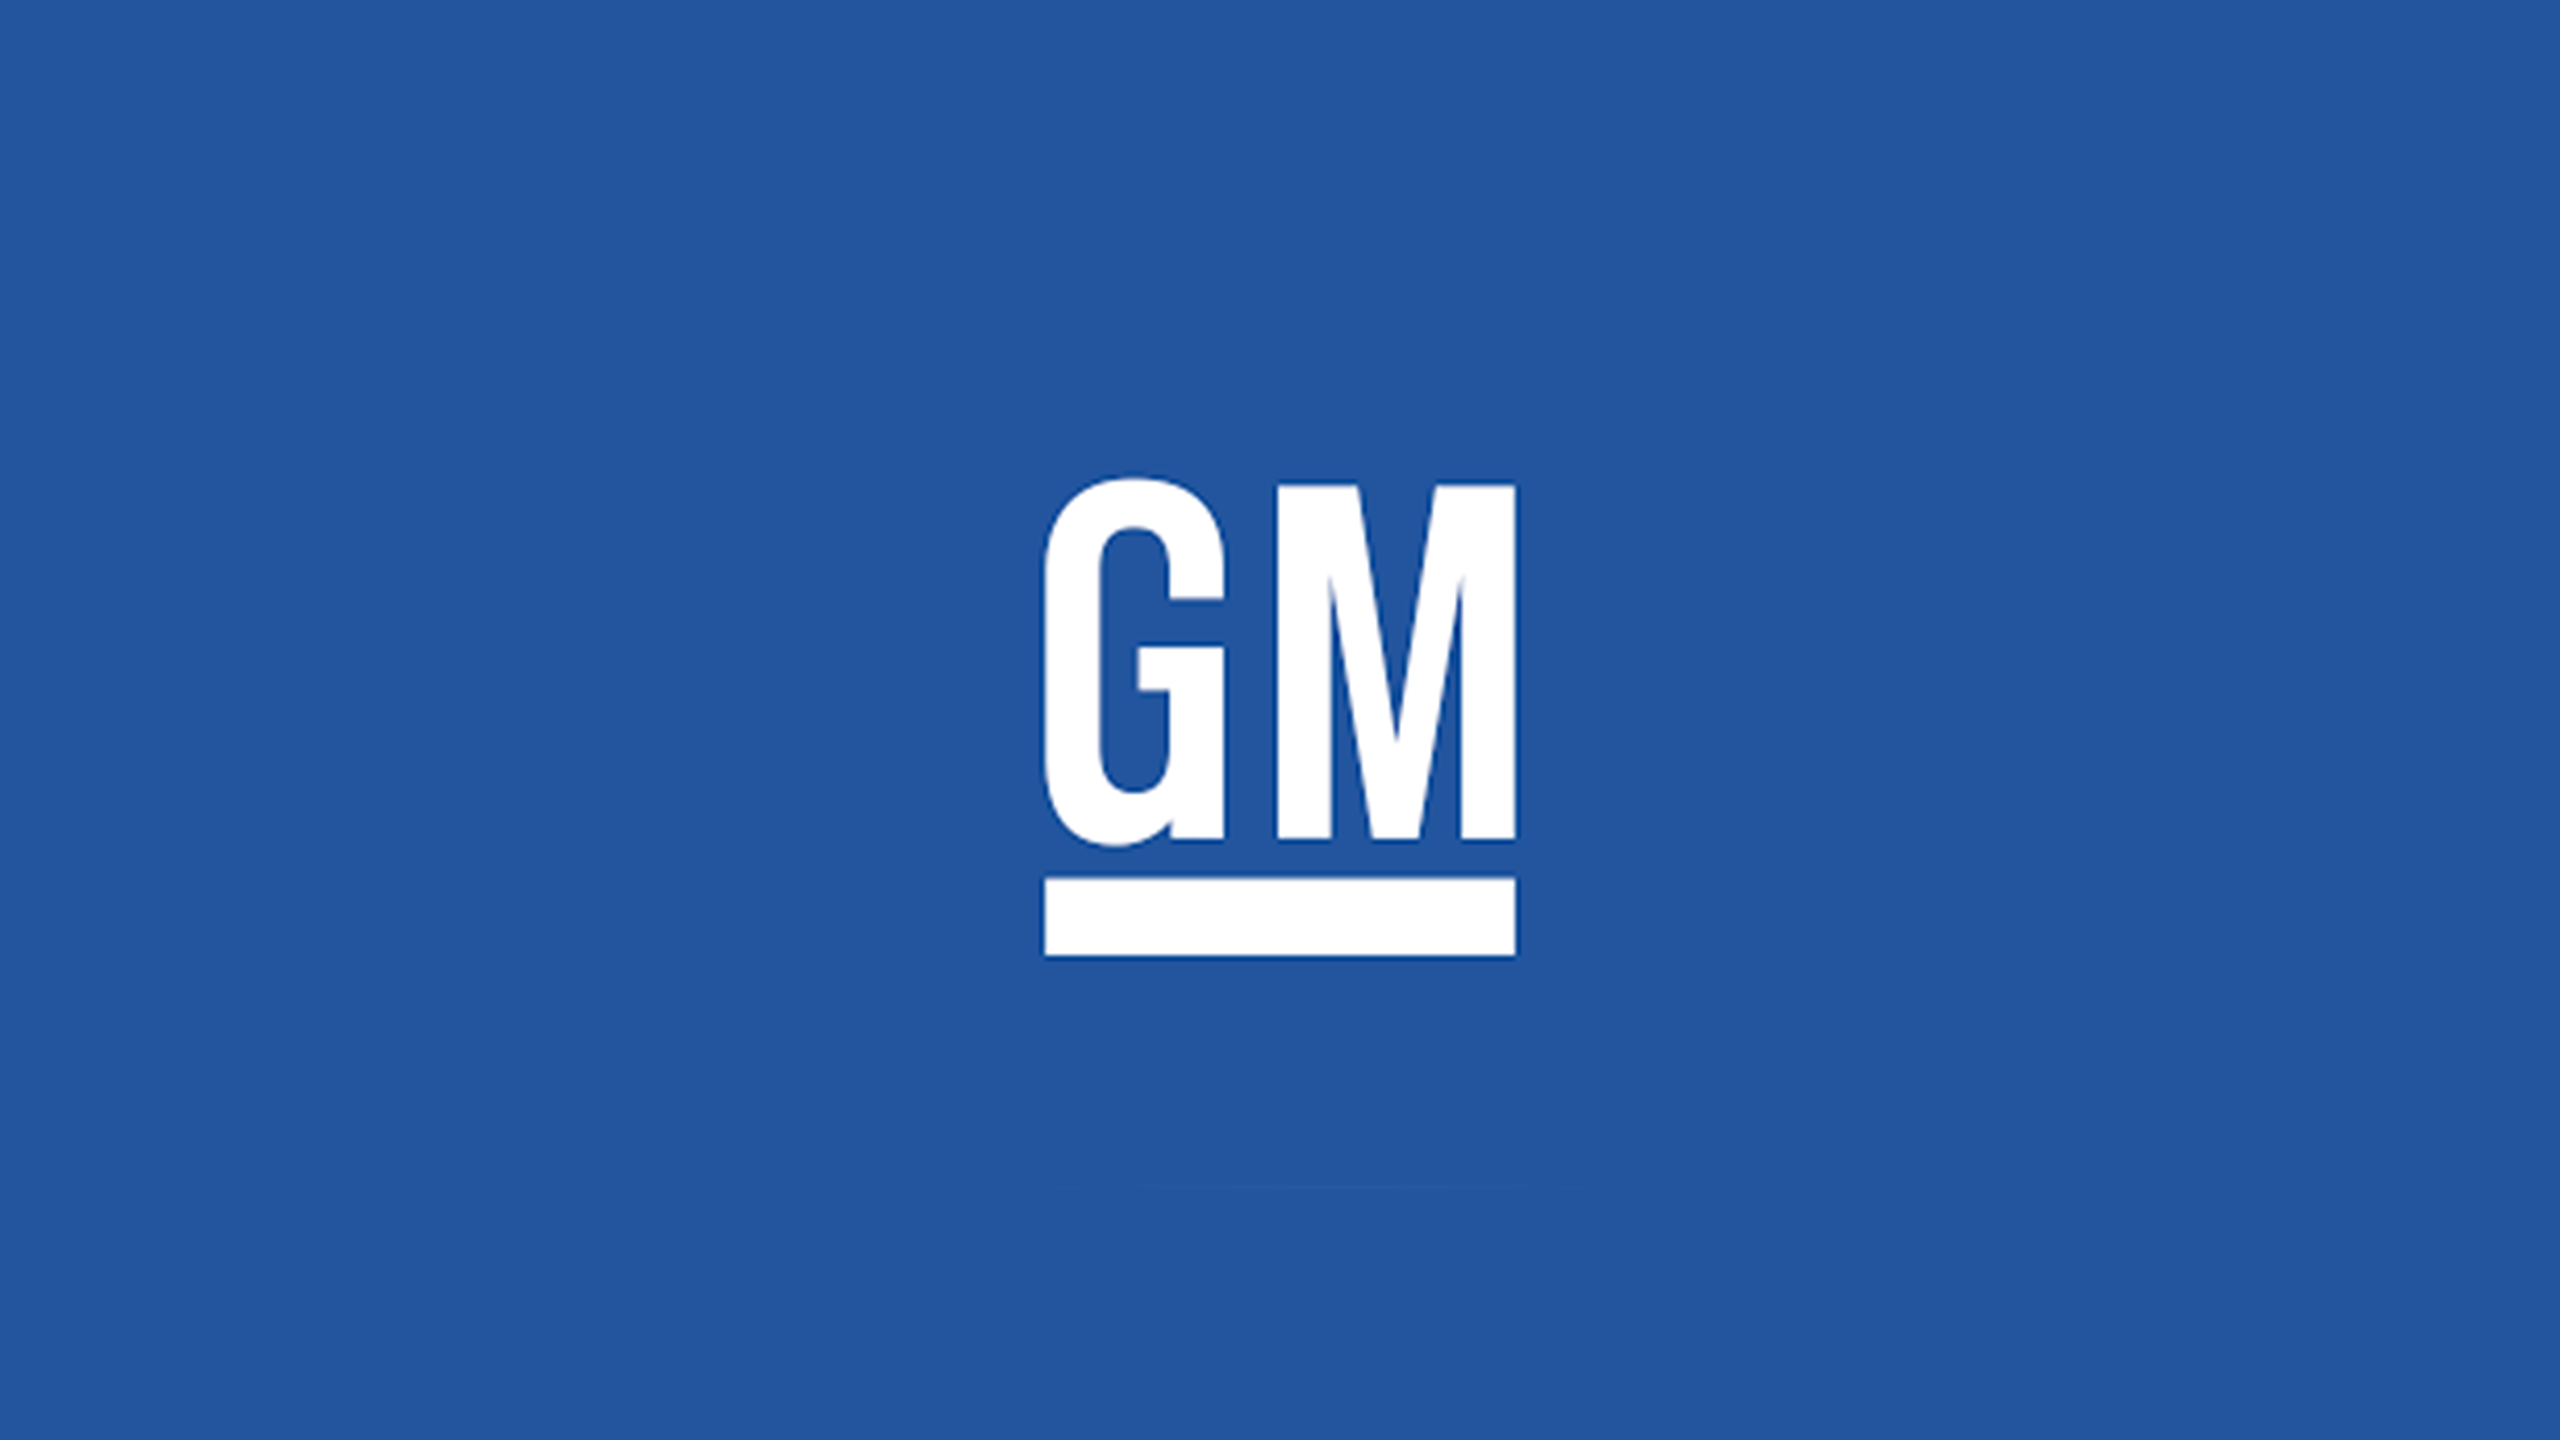 GM Board Approves New $6 Billion Share Buyback Plan